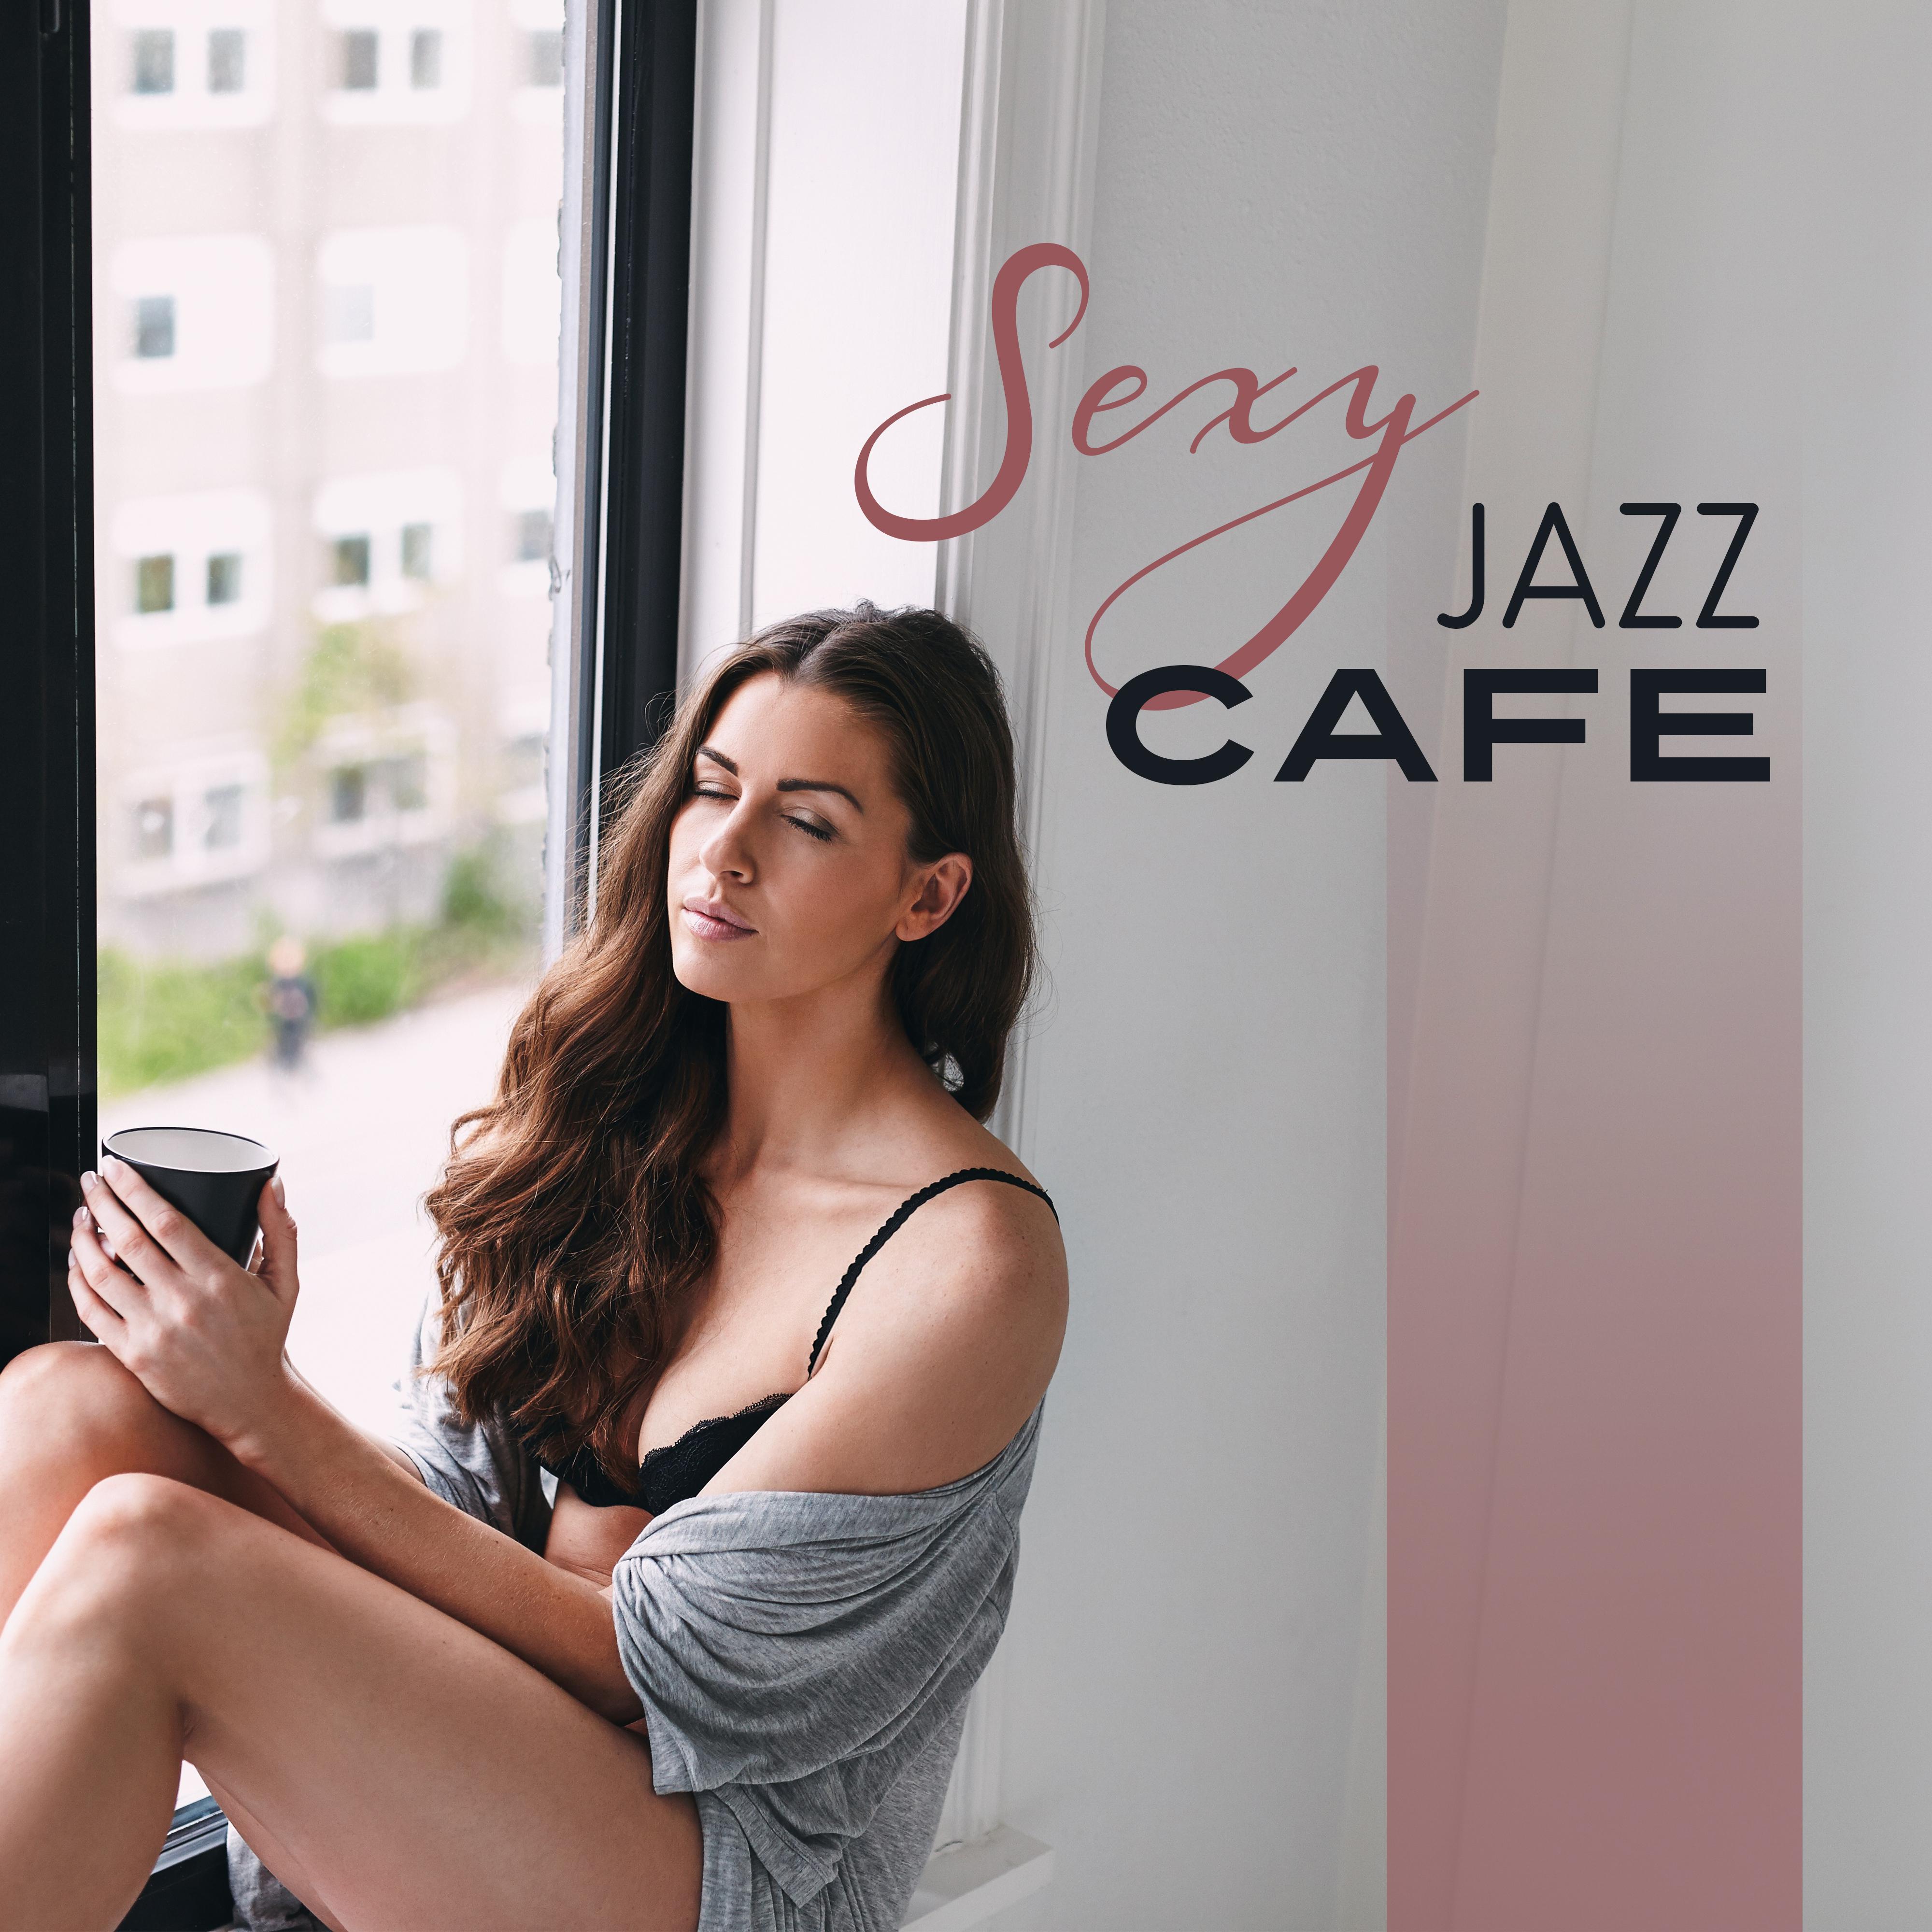 Jazz Cafe  New Jazz Music for Cafe  Restaurant, Instrumental Ambient, Relax